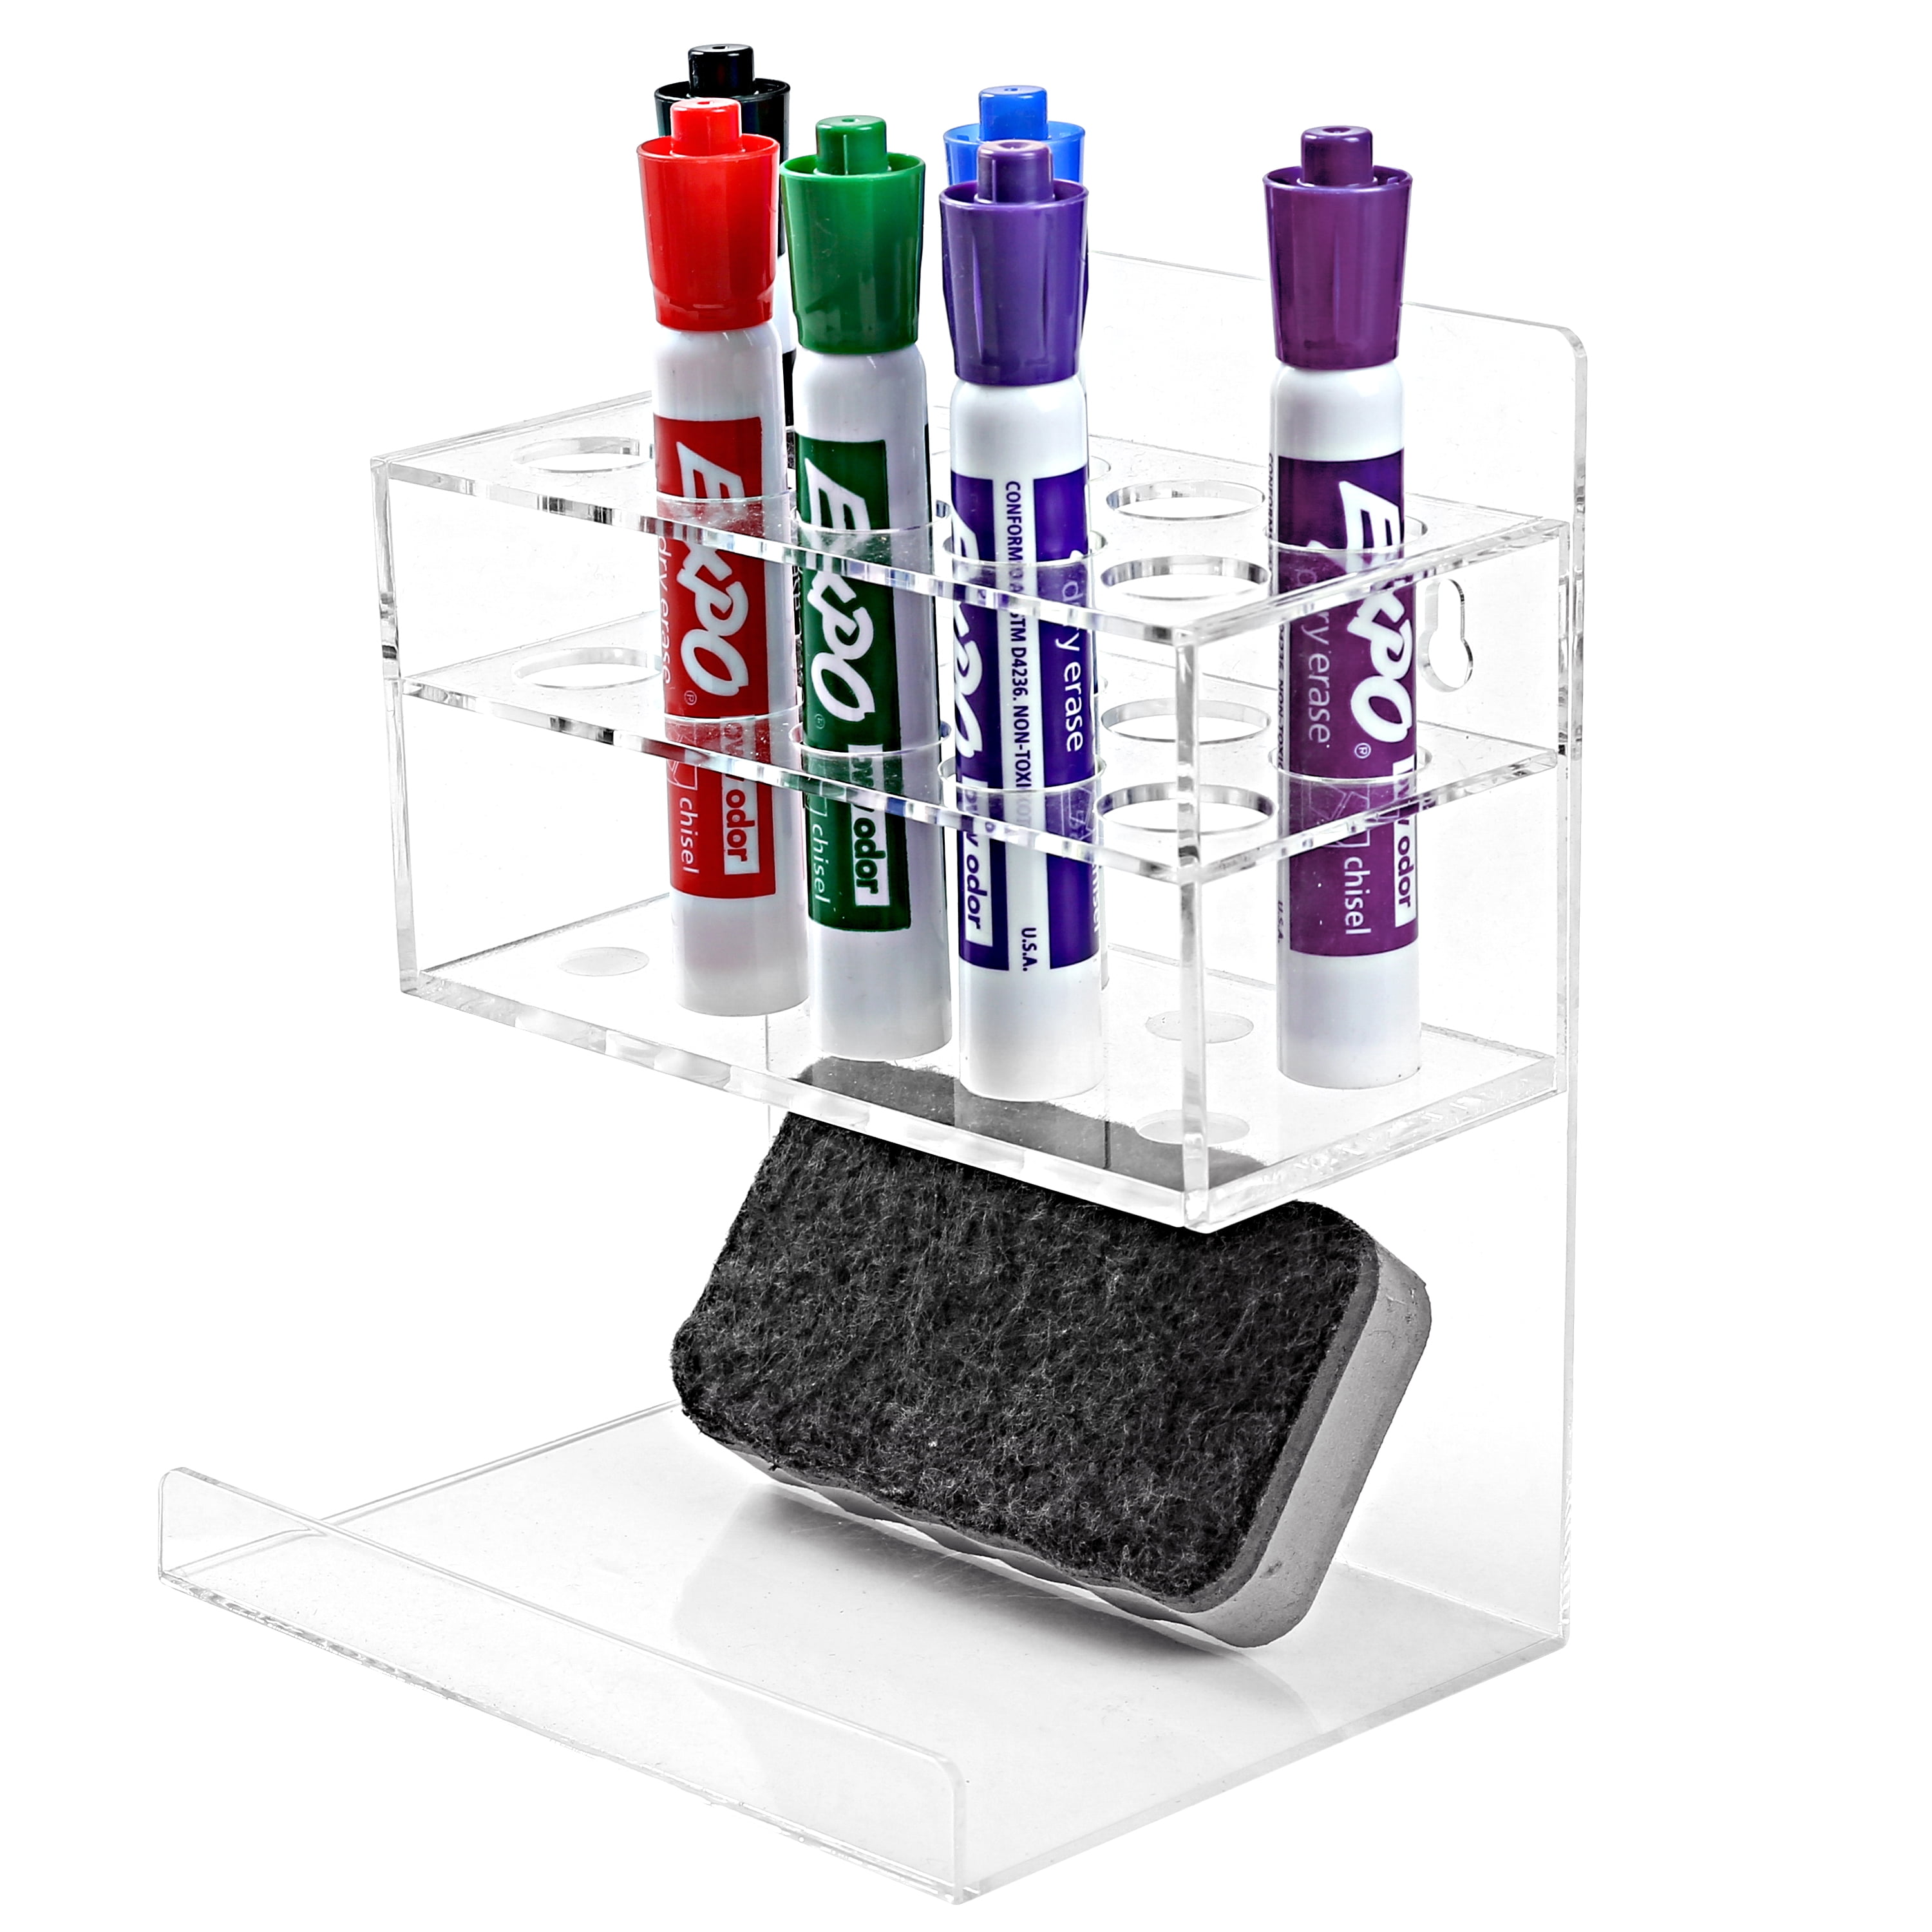 MyGift Black Acrylic Whiteboard Marker Holder Organizer, Wall Mounted  Storage Rack for Dry Erase Markers, Eraser and Cleaning Bottle